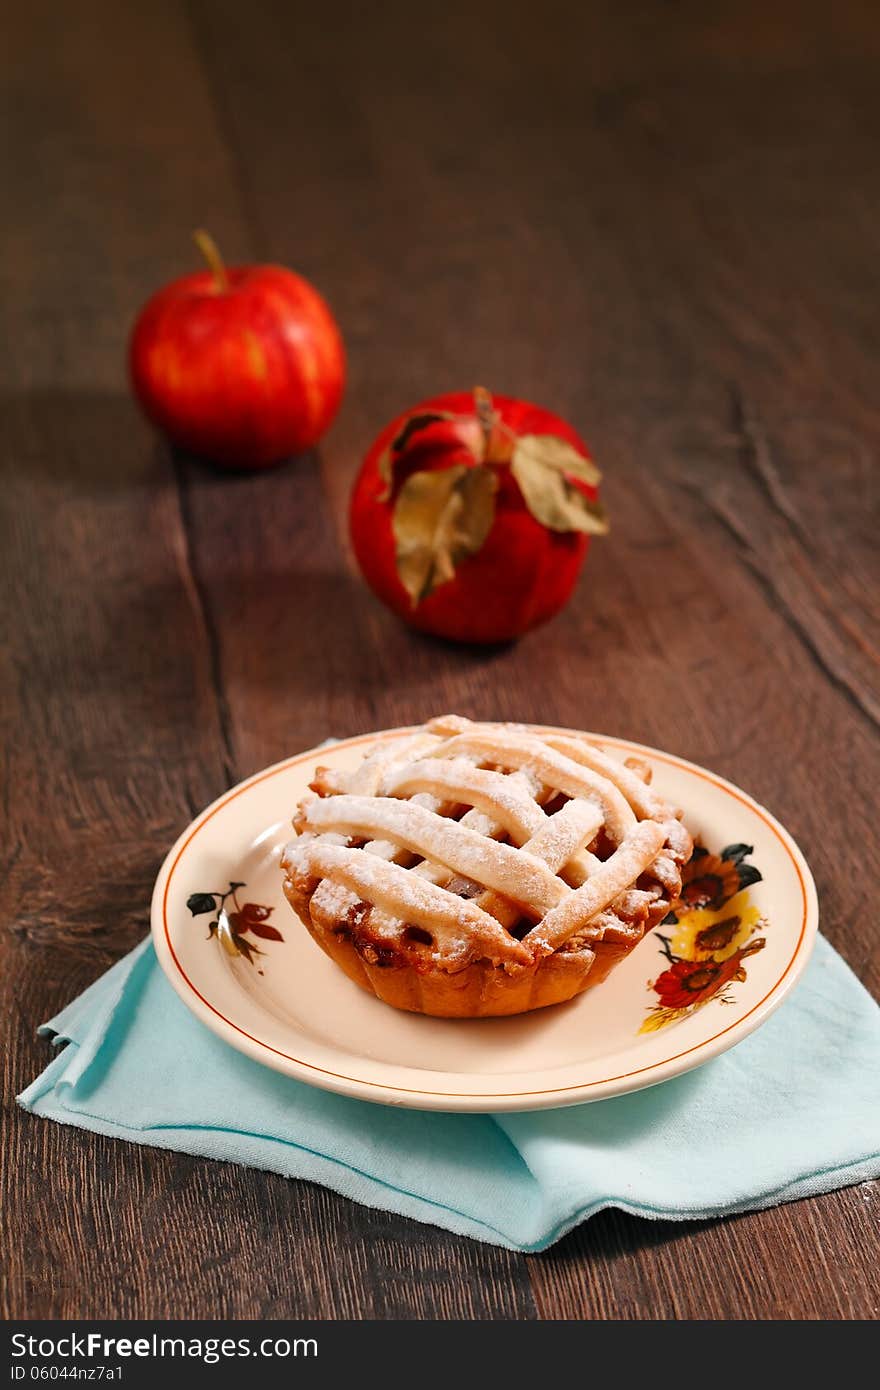 Small apple pie on wooden table